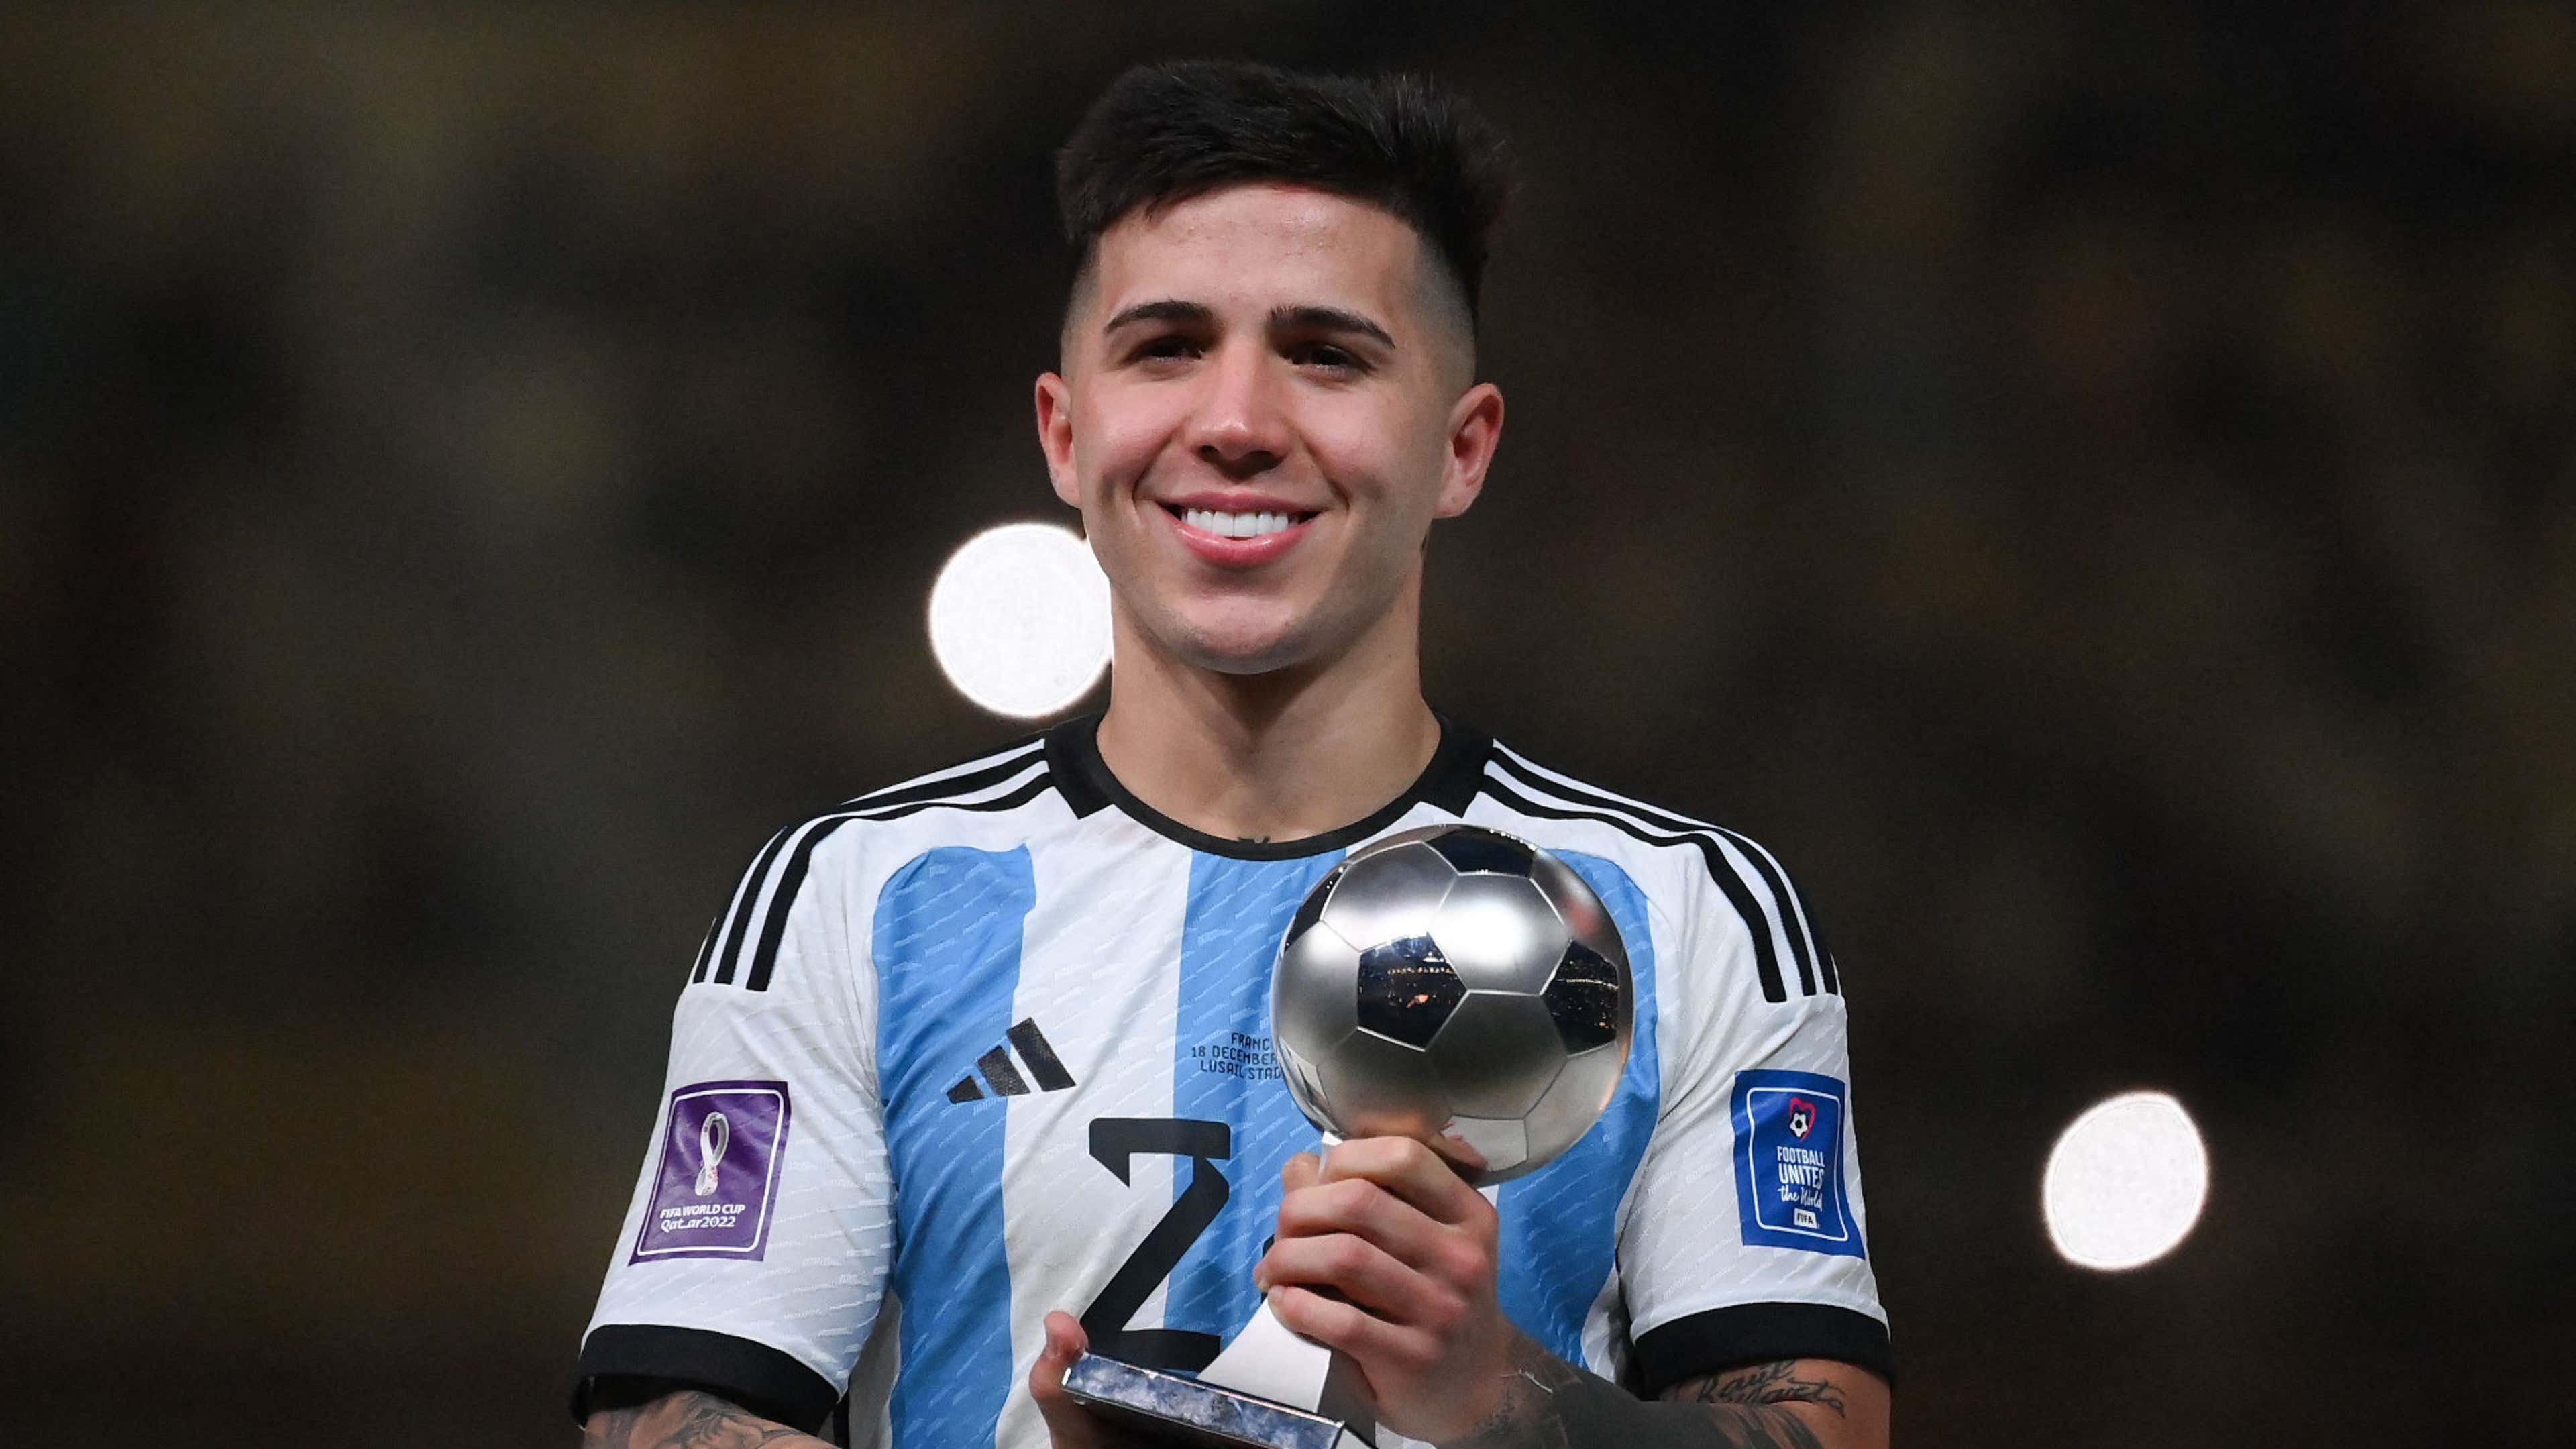 Highest Rated Argentina FIFA 22 Players